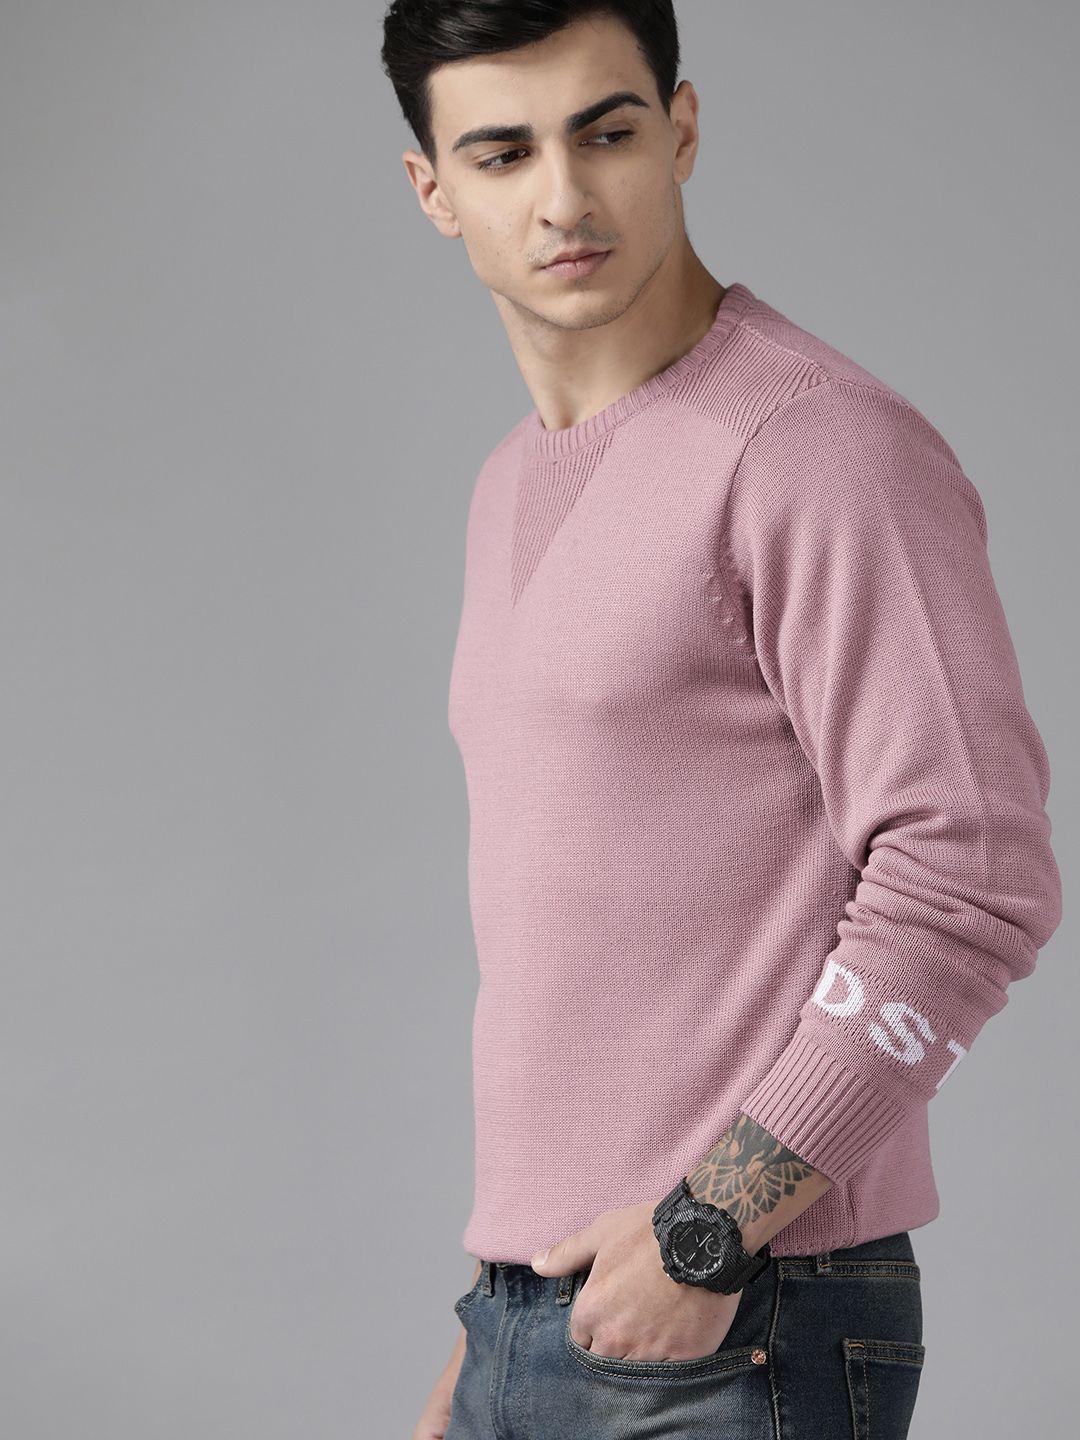 the-roadster-lifestyle-co.-ribbed-pullover